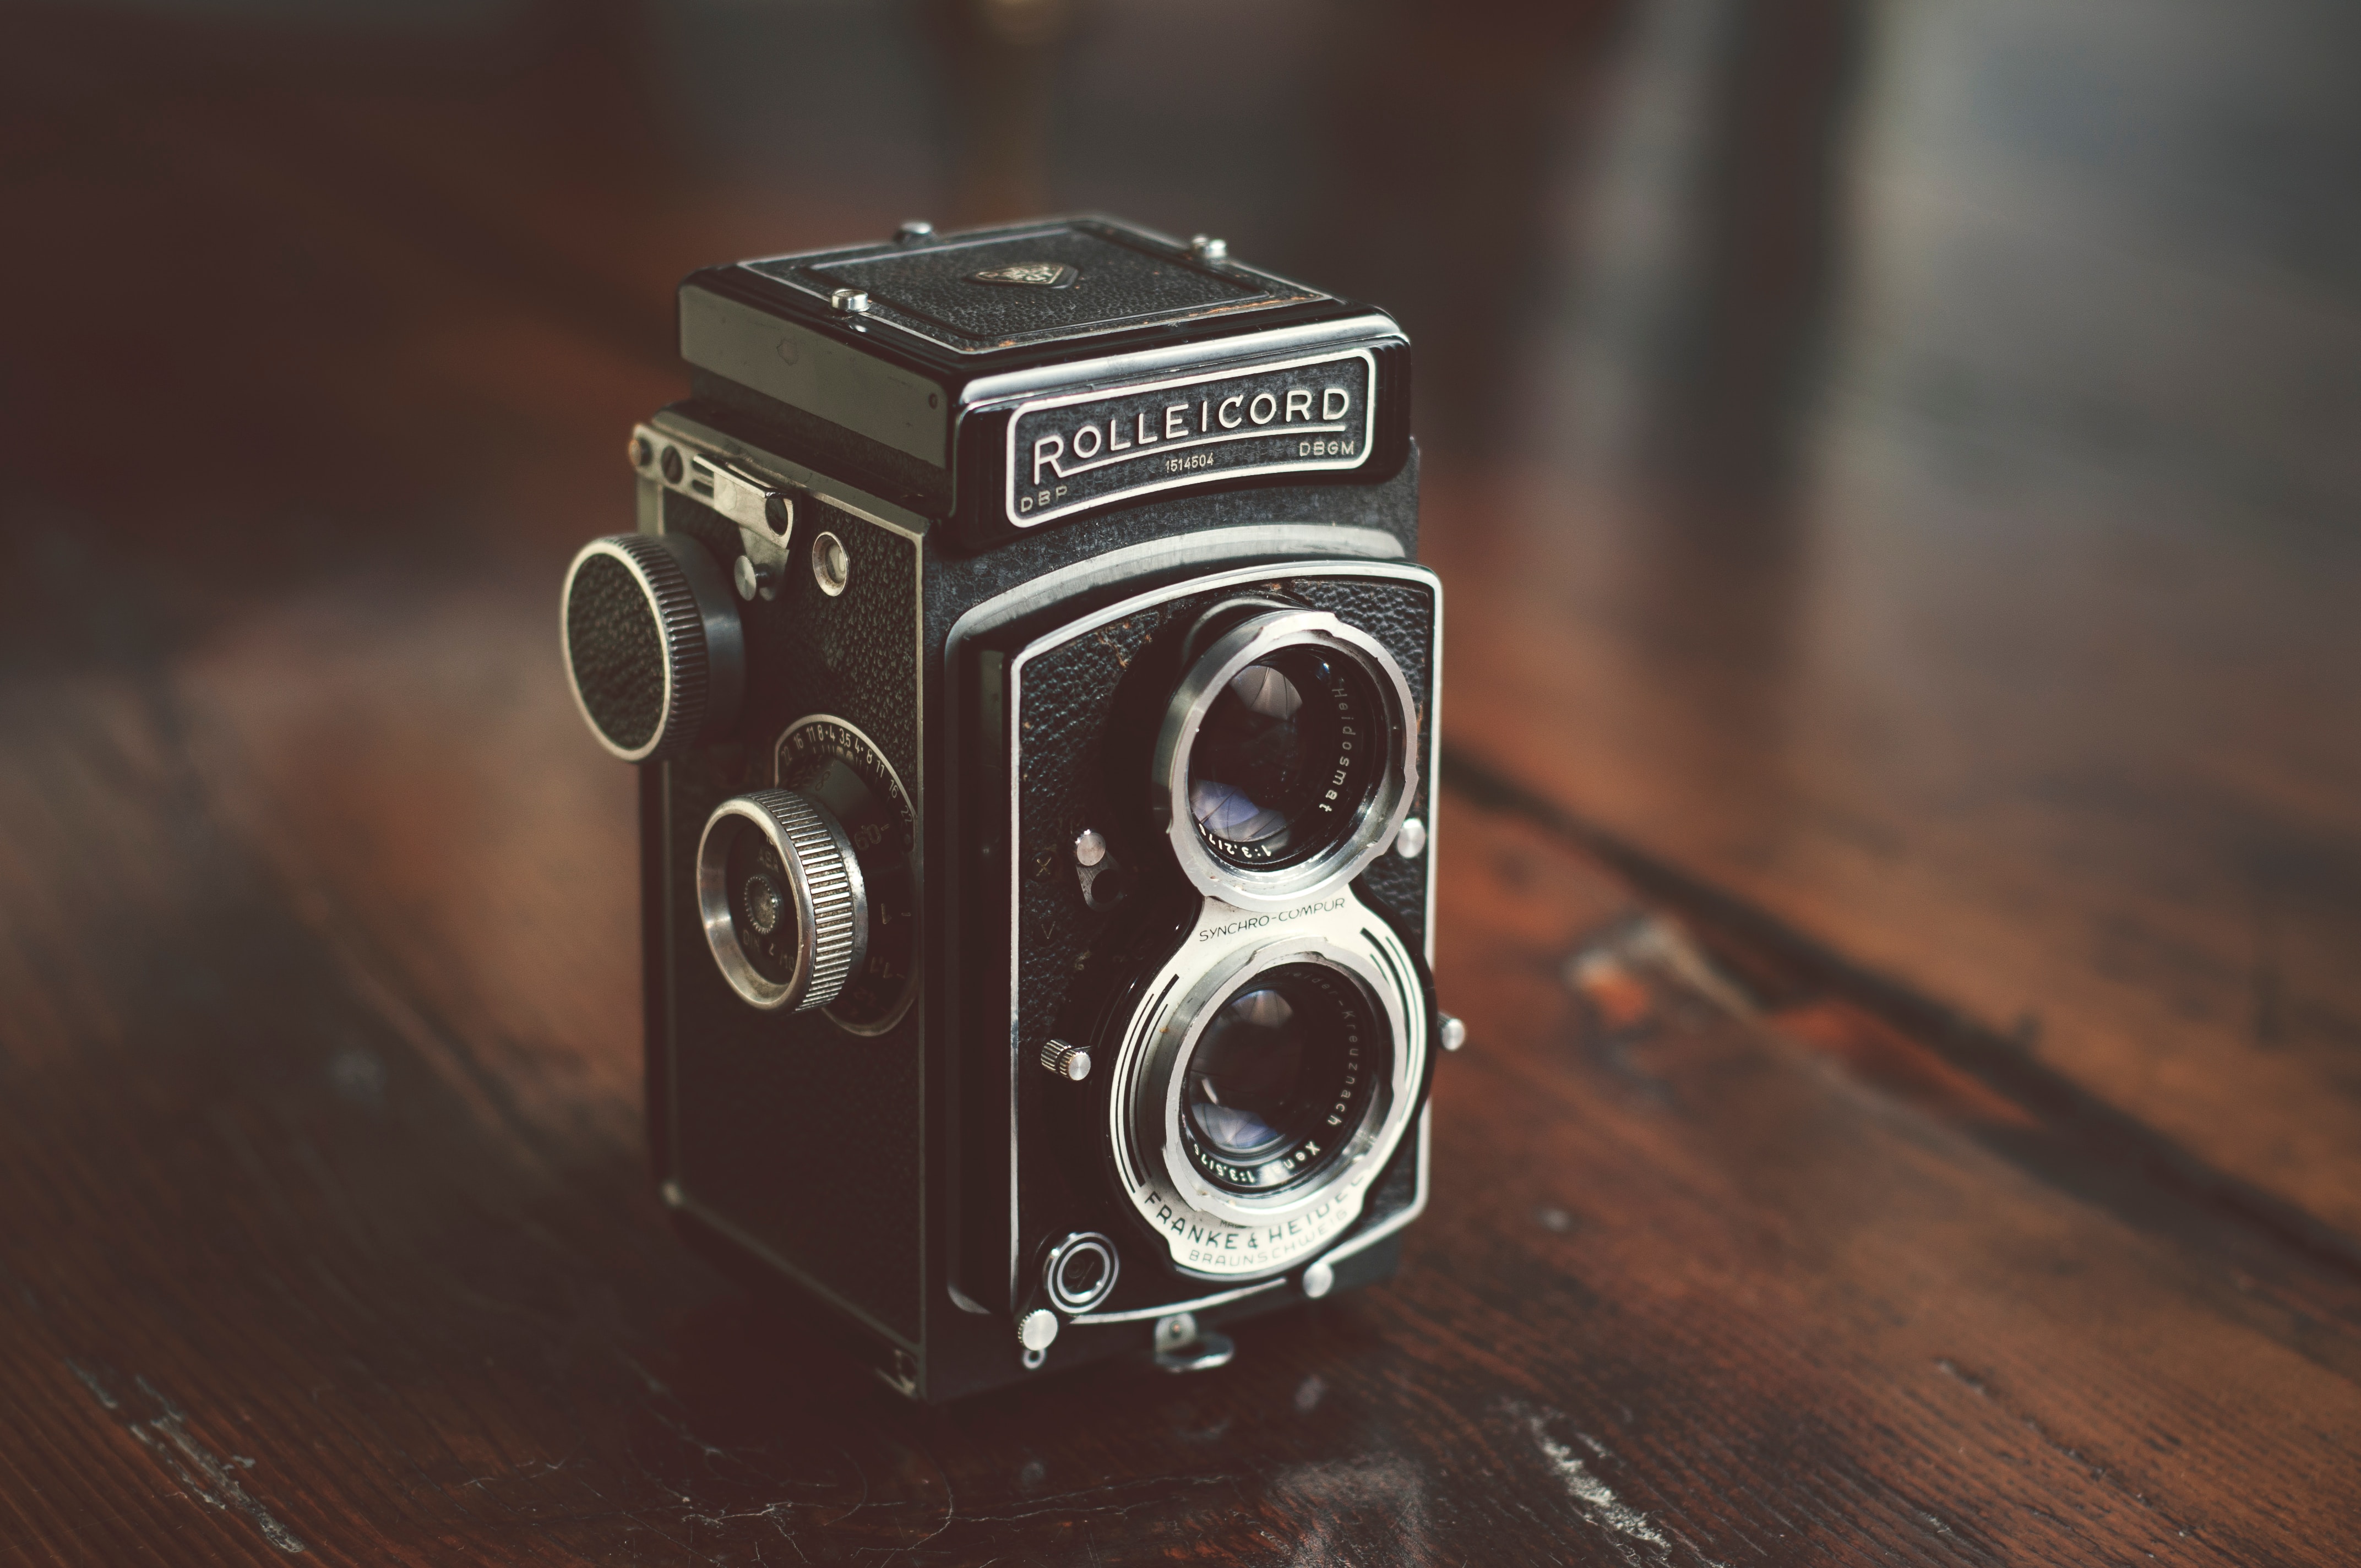 photography, camera, old, vintage, lenses, technologies, technology, photo Full HD